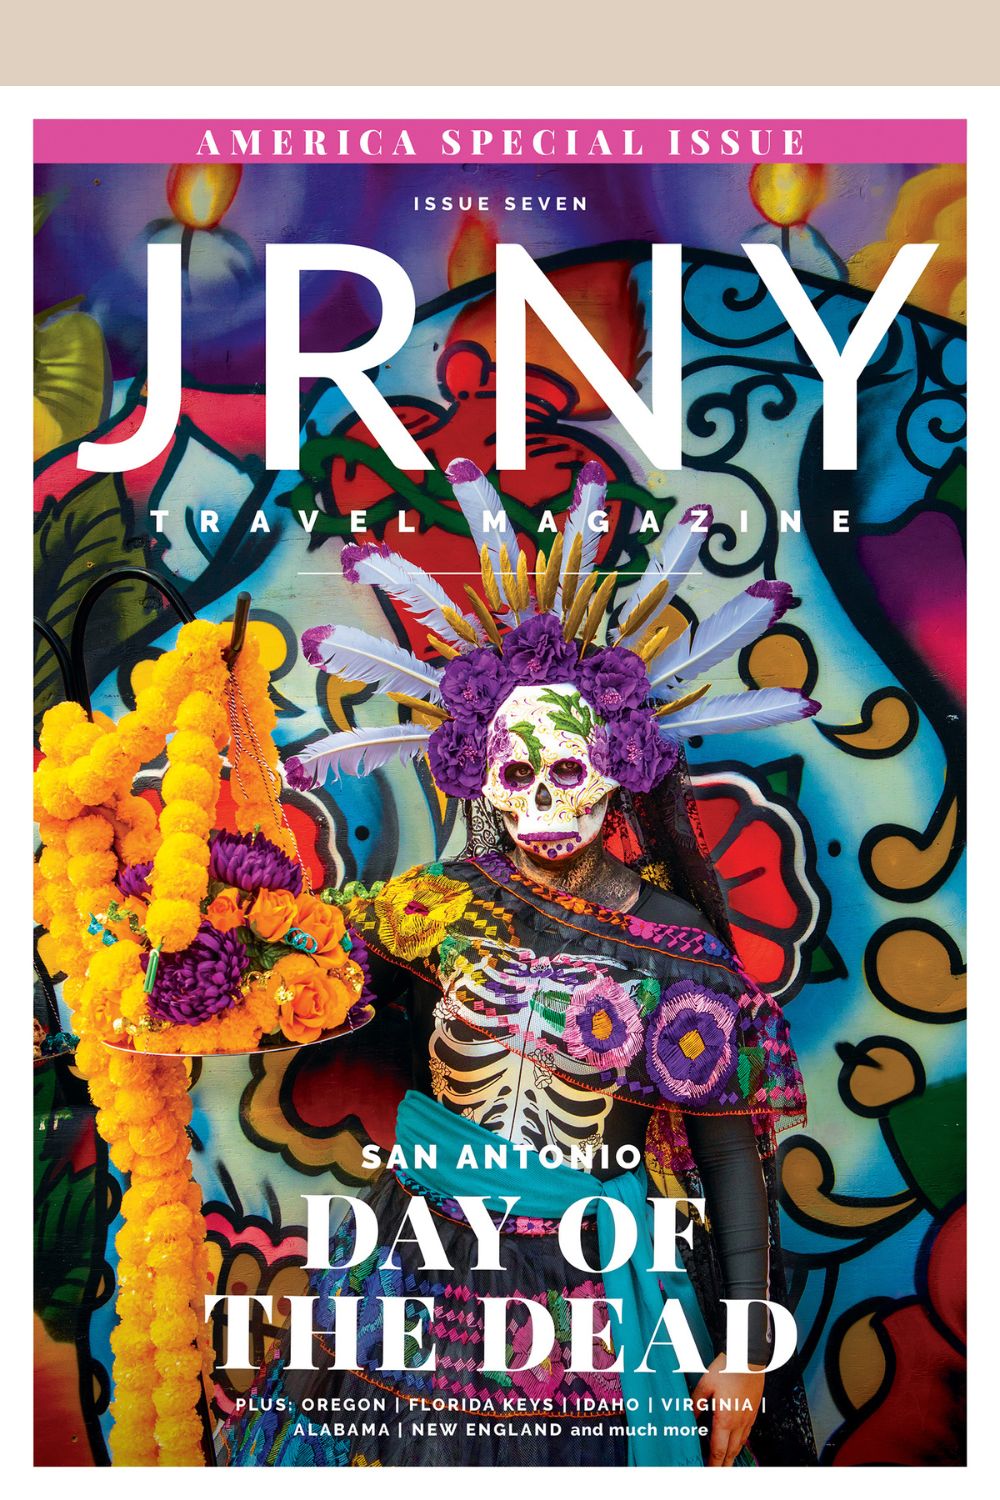 JRNY Magazine Issue 7 cover